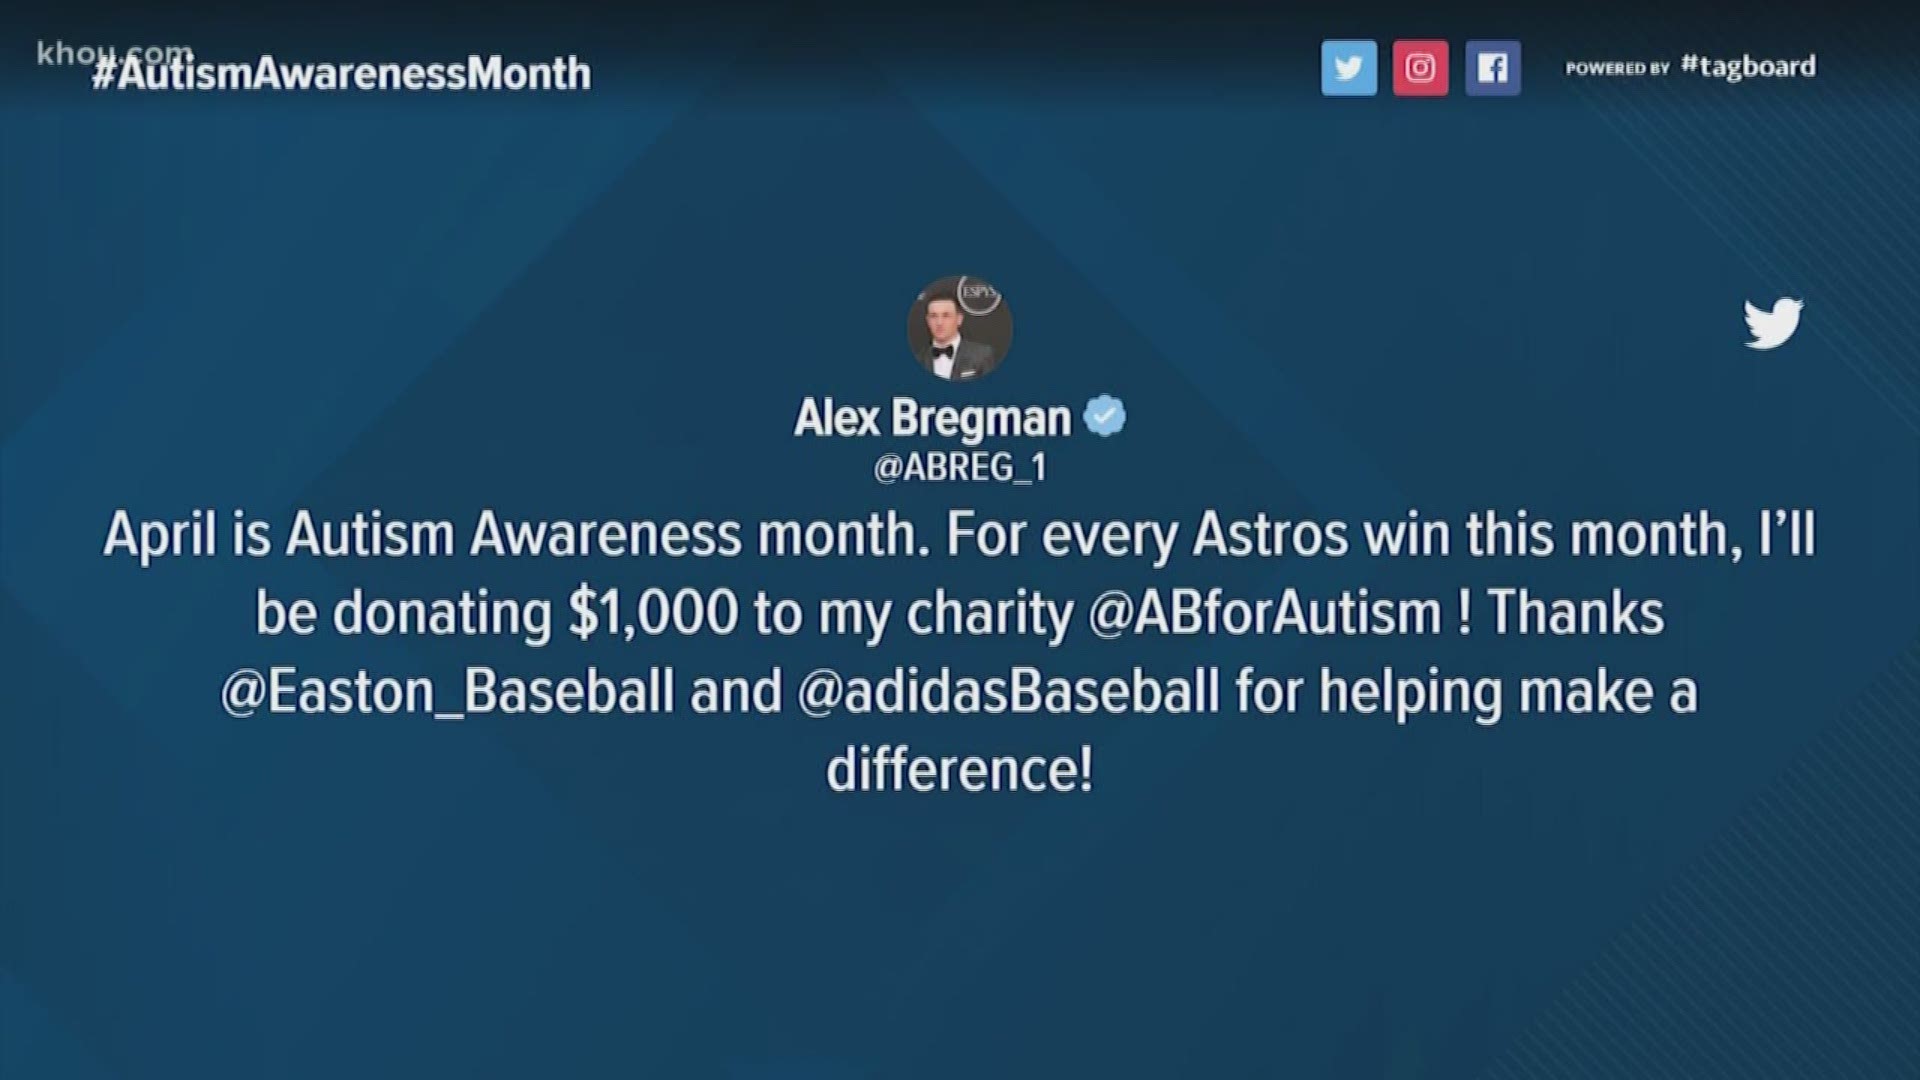 Astros star Alex Bregman announced he would donate $1,000 for every Astros win this month to his charity AB for Autism in honor of Autism Awareness Month.